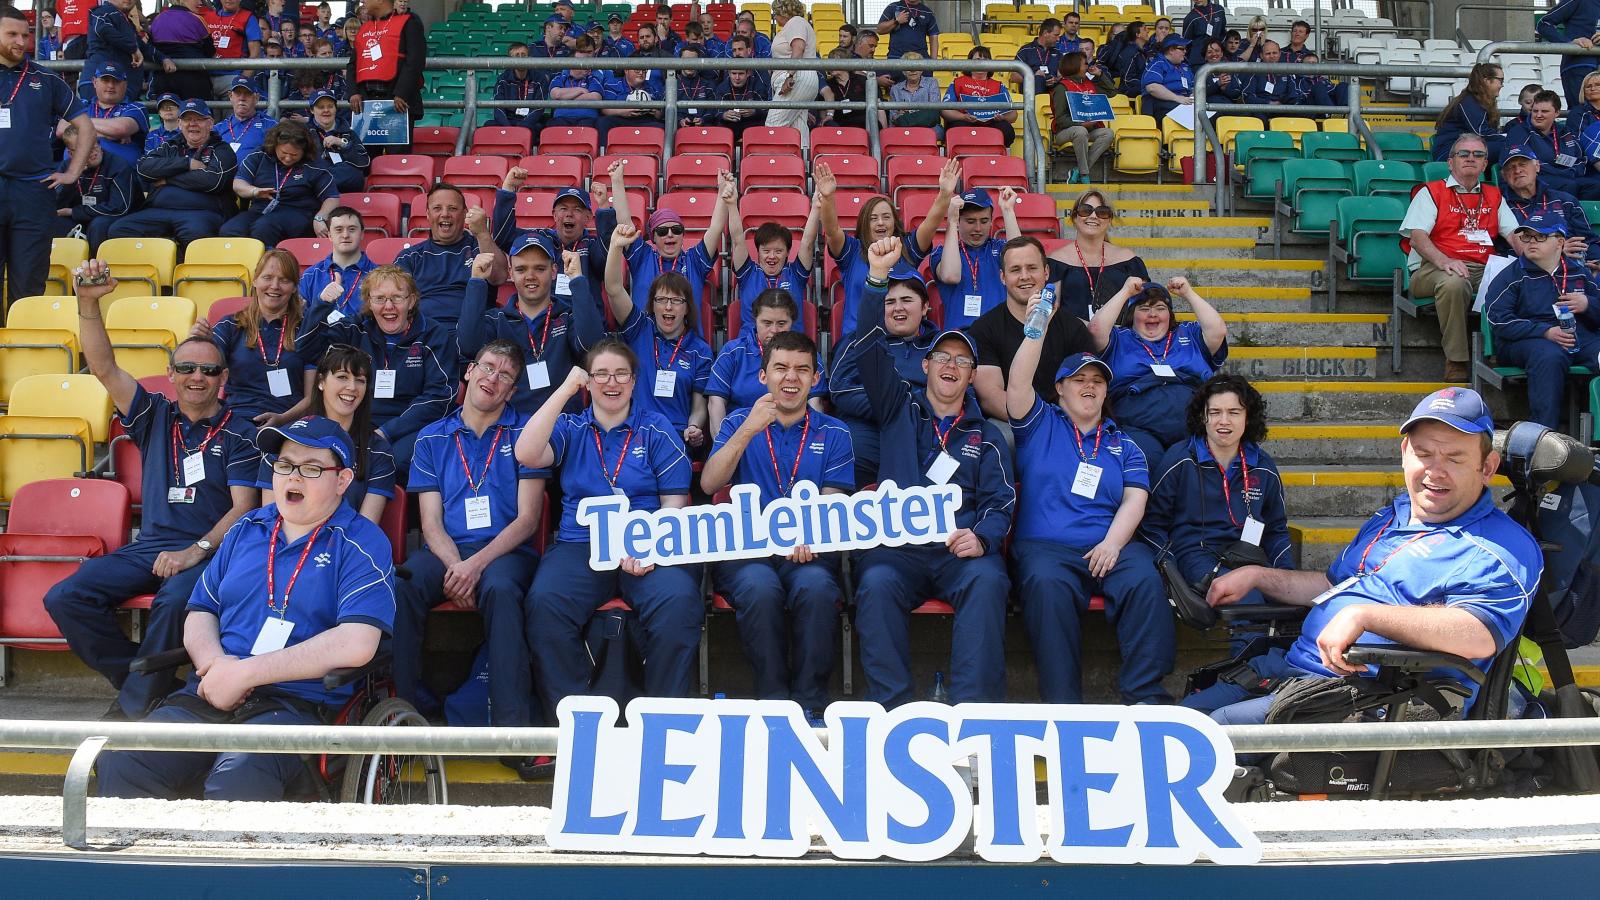 Large group from Leinster team in front of Leinster sign